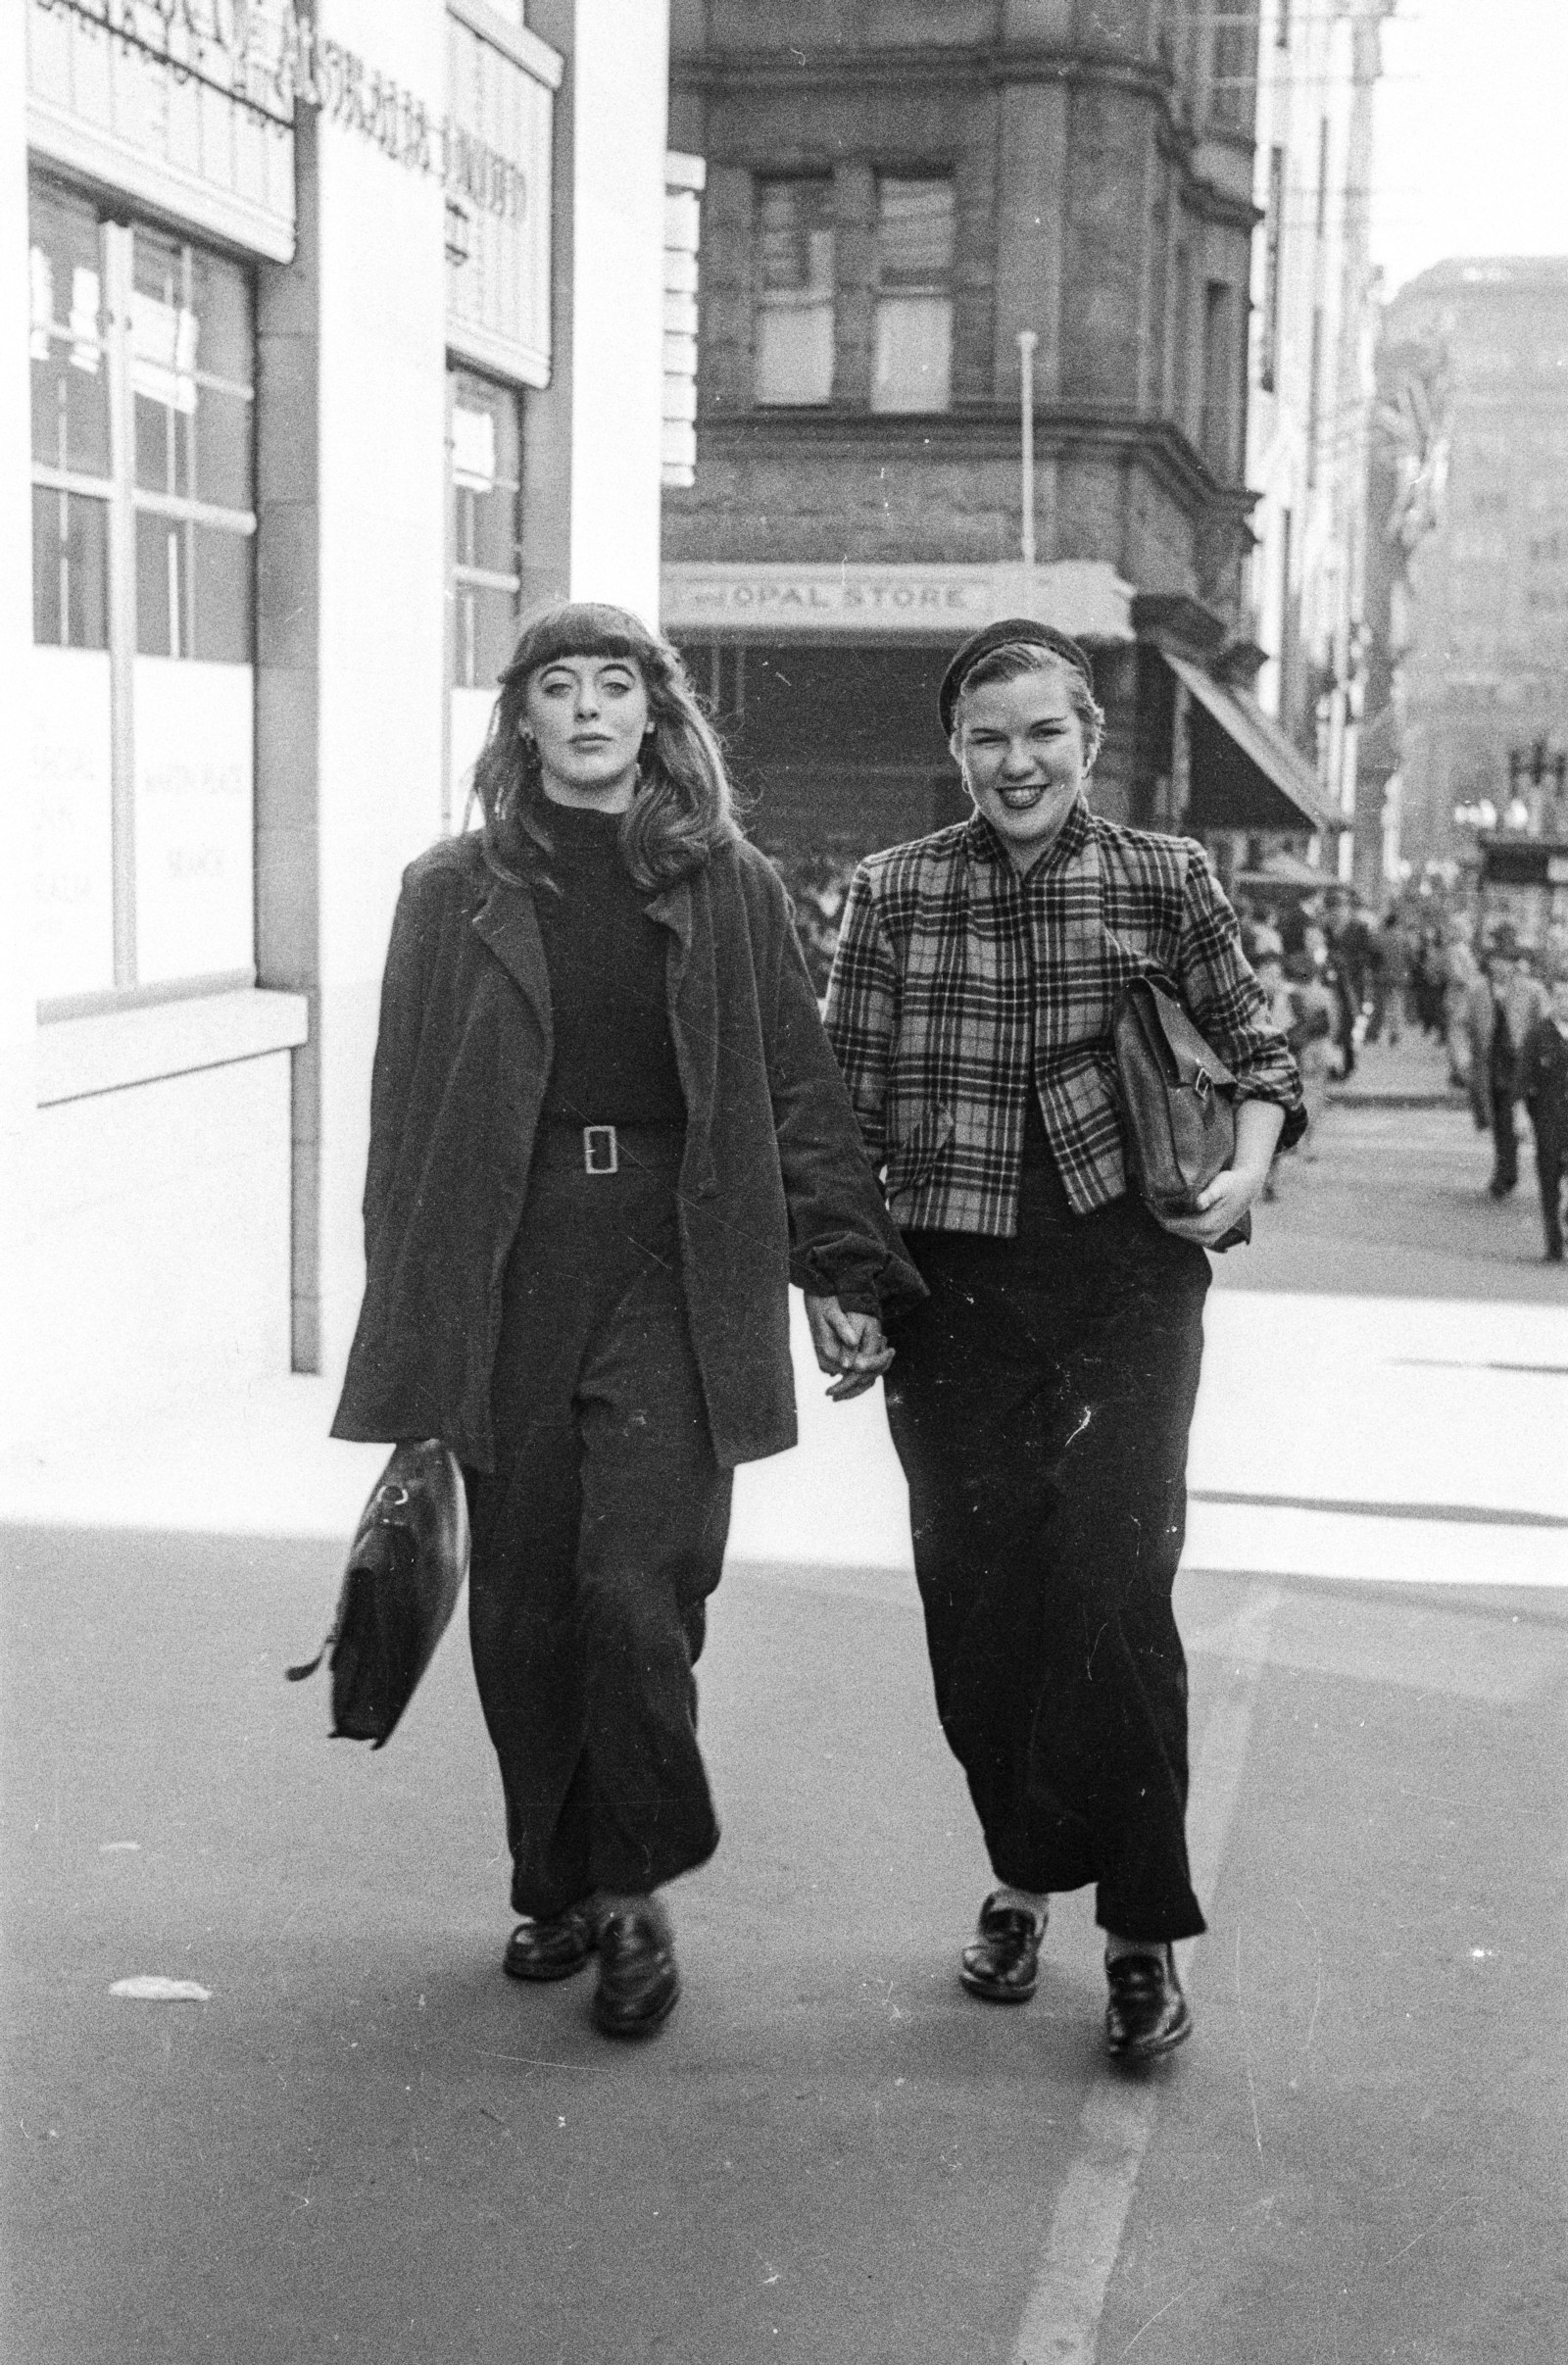 Candid street photograph of pedestrians taken in Martin Place, Sydney, by an unknown Ikon Studio photographer during 1950.